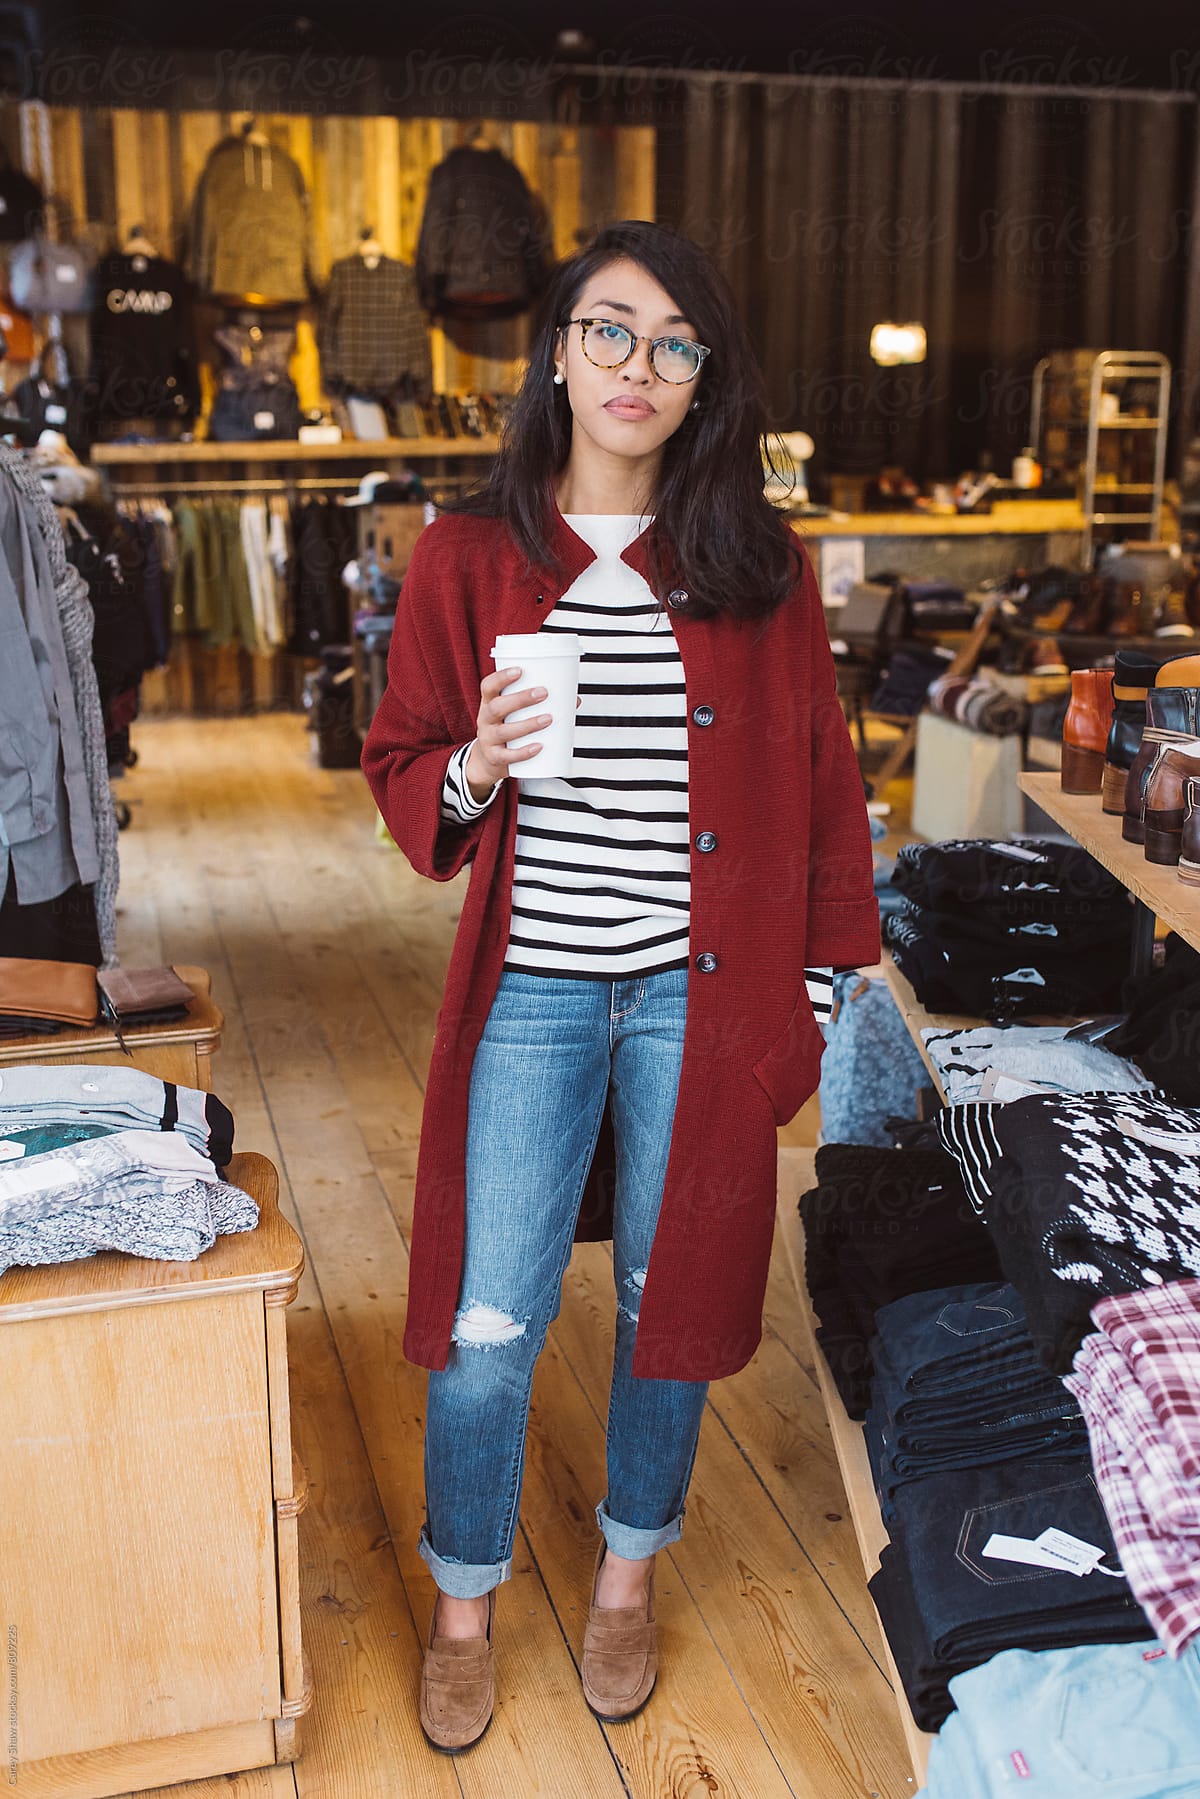 Stylish woman shopping at local clothing store